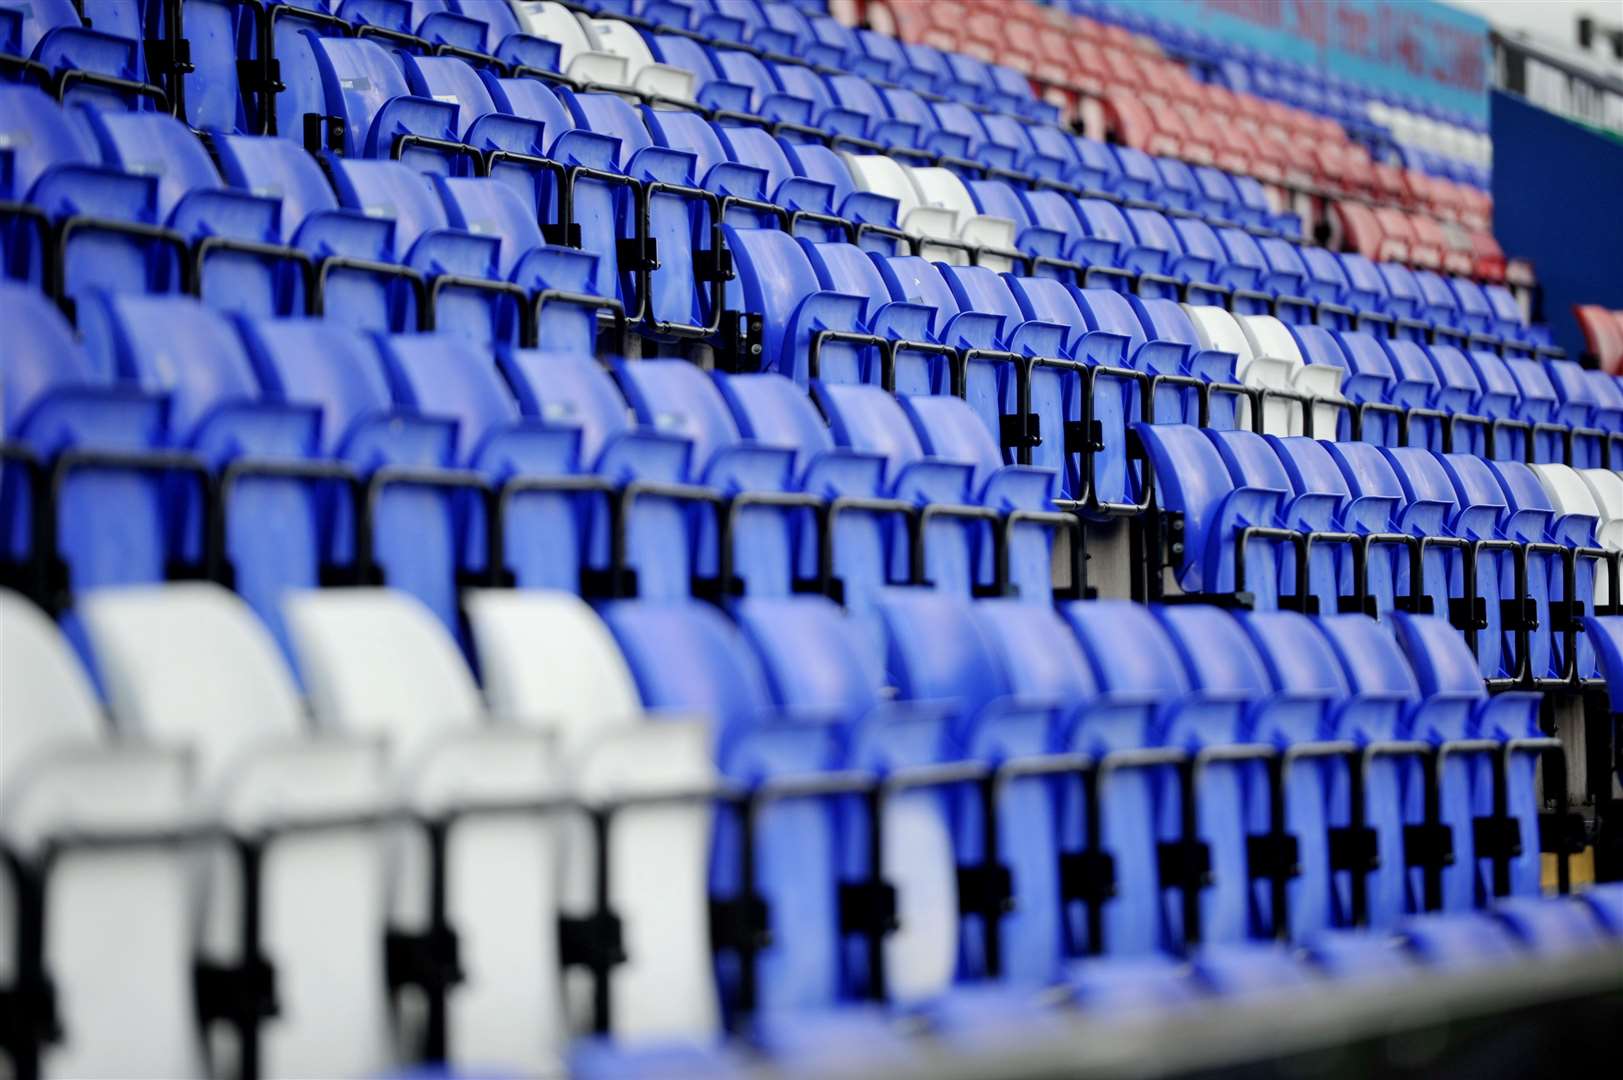 Seats were allegedly damaged at Inverness Caledonian FC's ground.